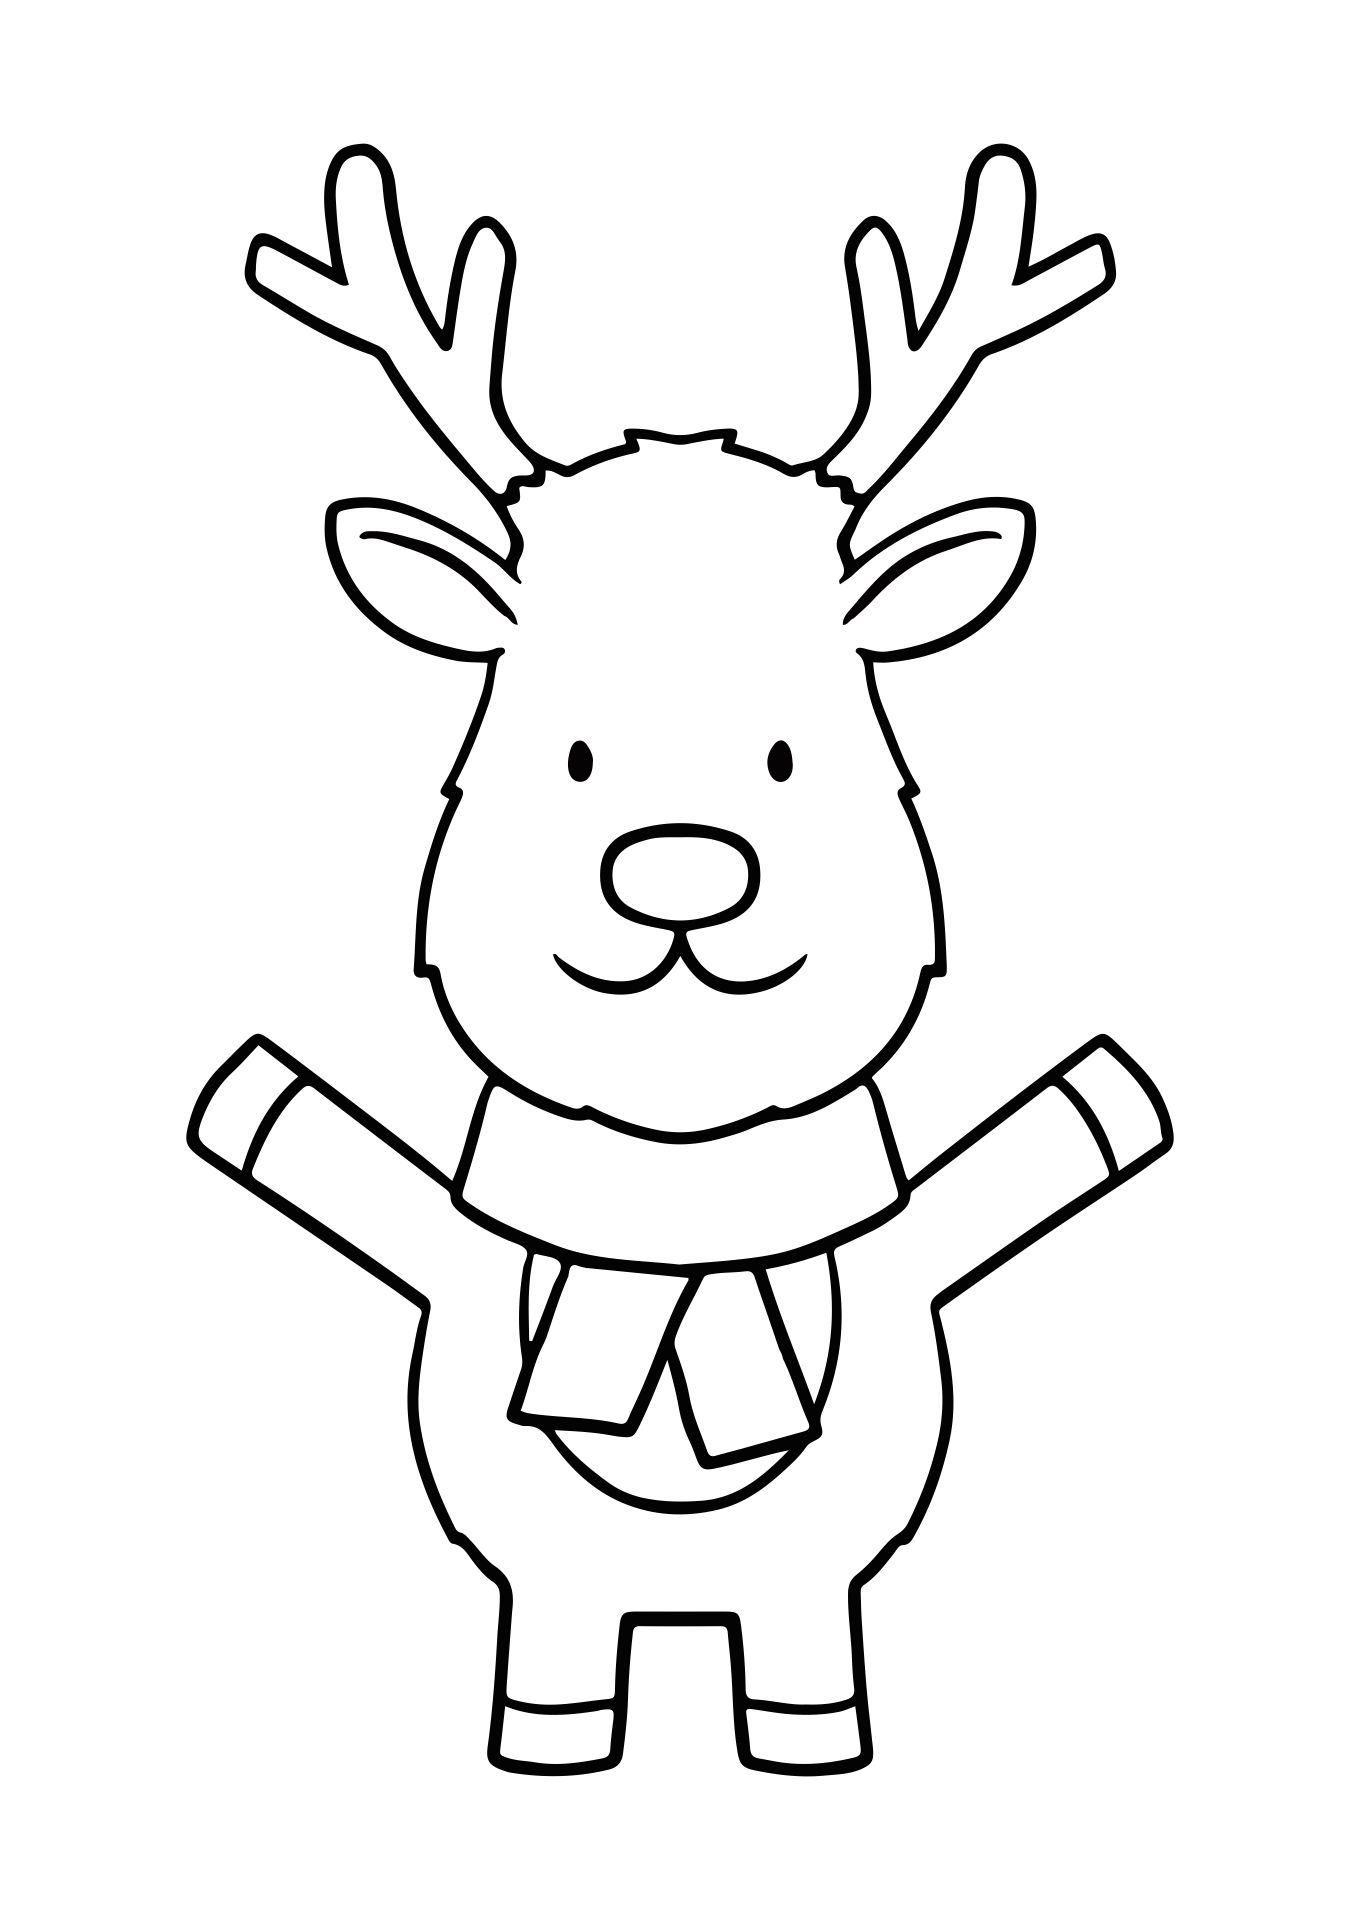 Printable Christmas Rudolph Coloring Pages